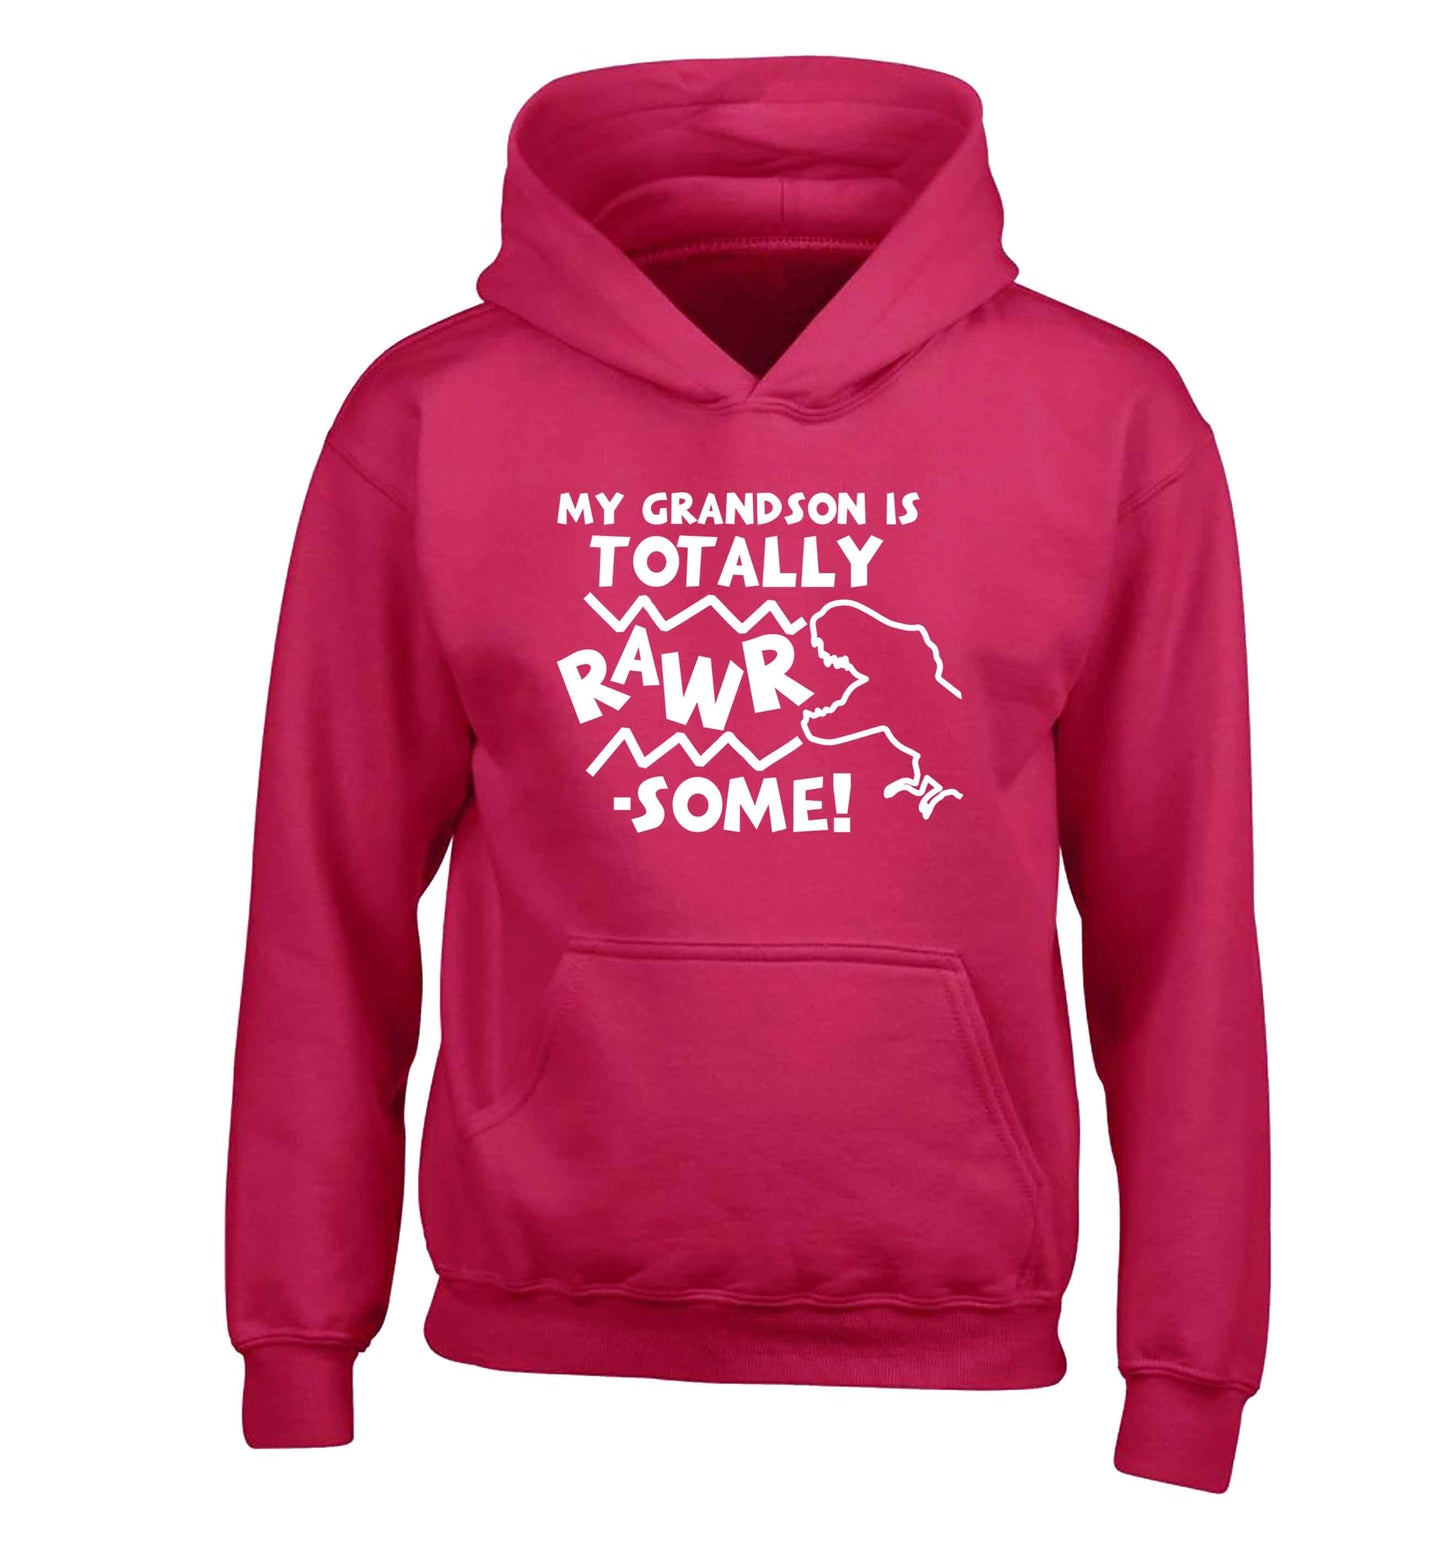 My grandson is totally rawrsome children's pink hoodie 12-13 Years